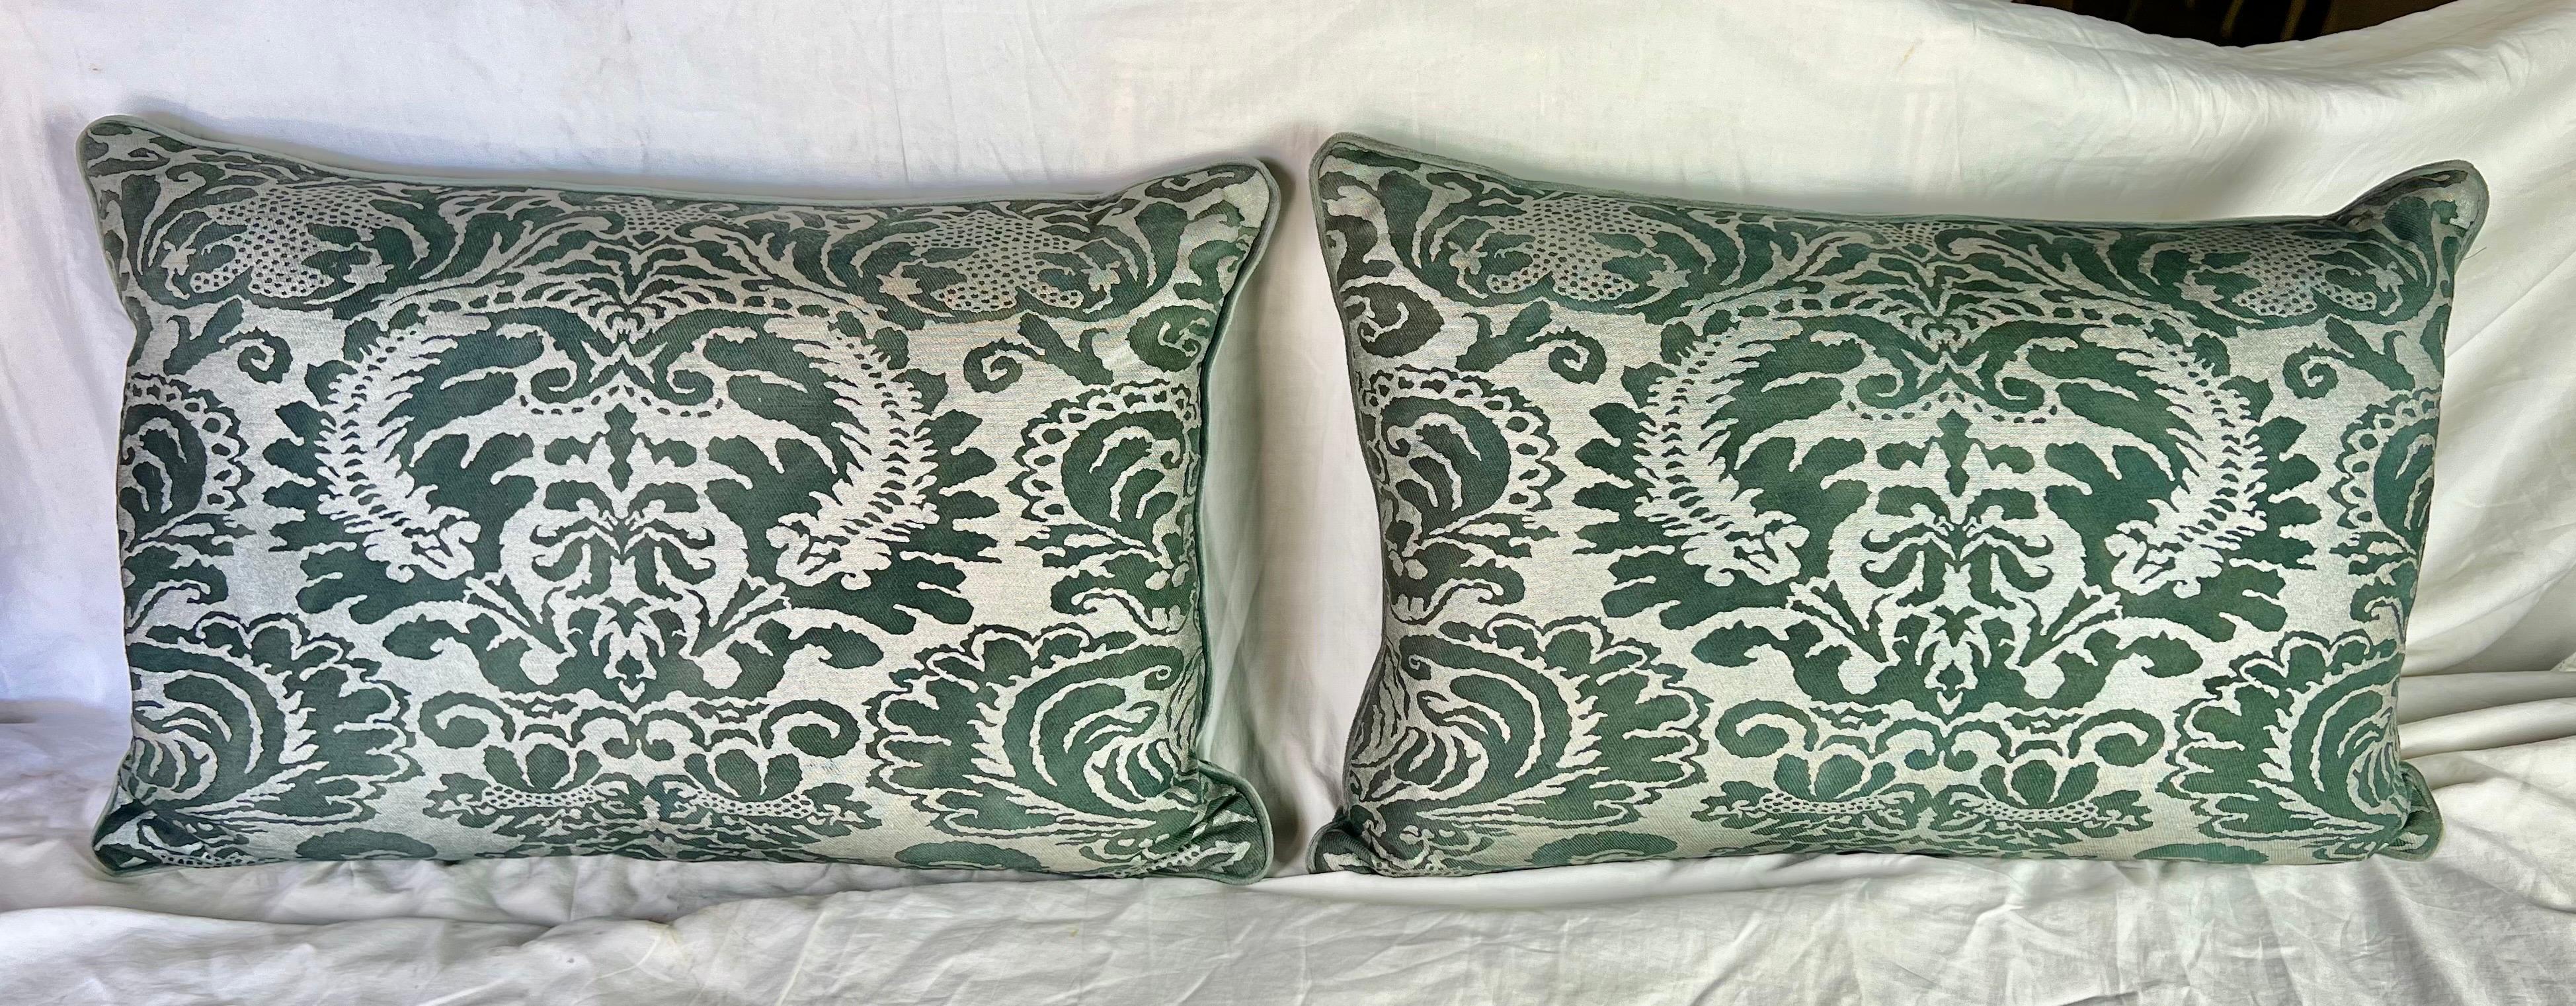 A sophisticated and unique pair of Fortuny textile pillows with a touch of dark gray and green, complemented by gray velvet backs and down inserts.  They add a luxurious touch to any space.